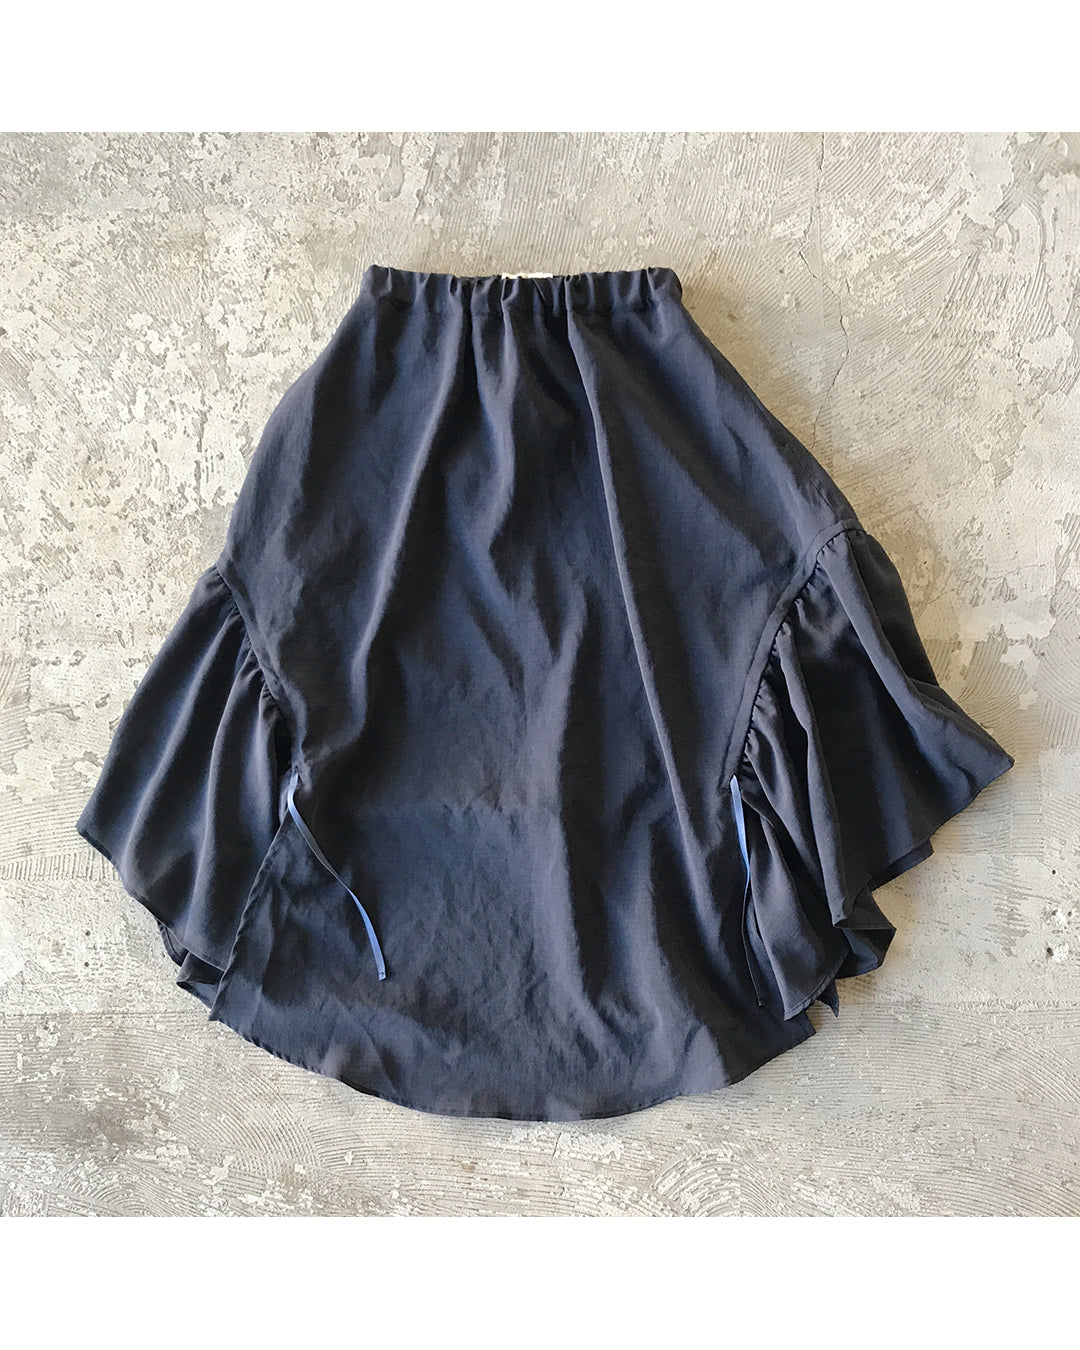 Reservation SWOON / Soon Drorting Lord Skirt (Navy) Delivery date April